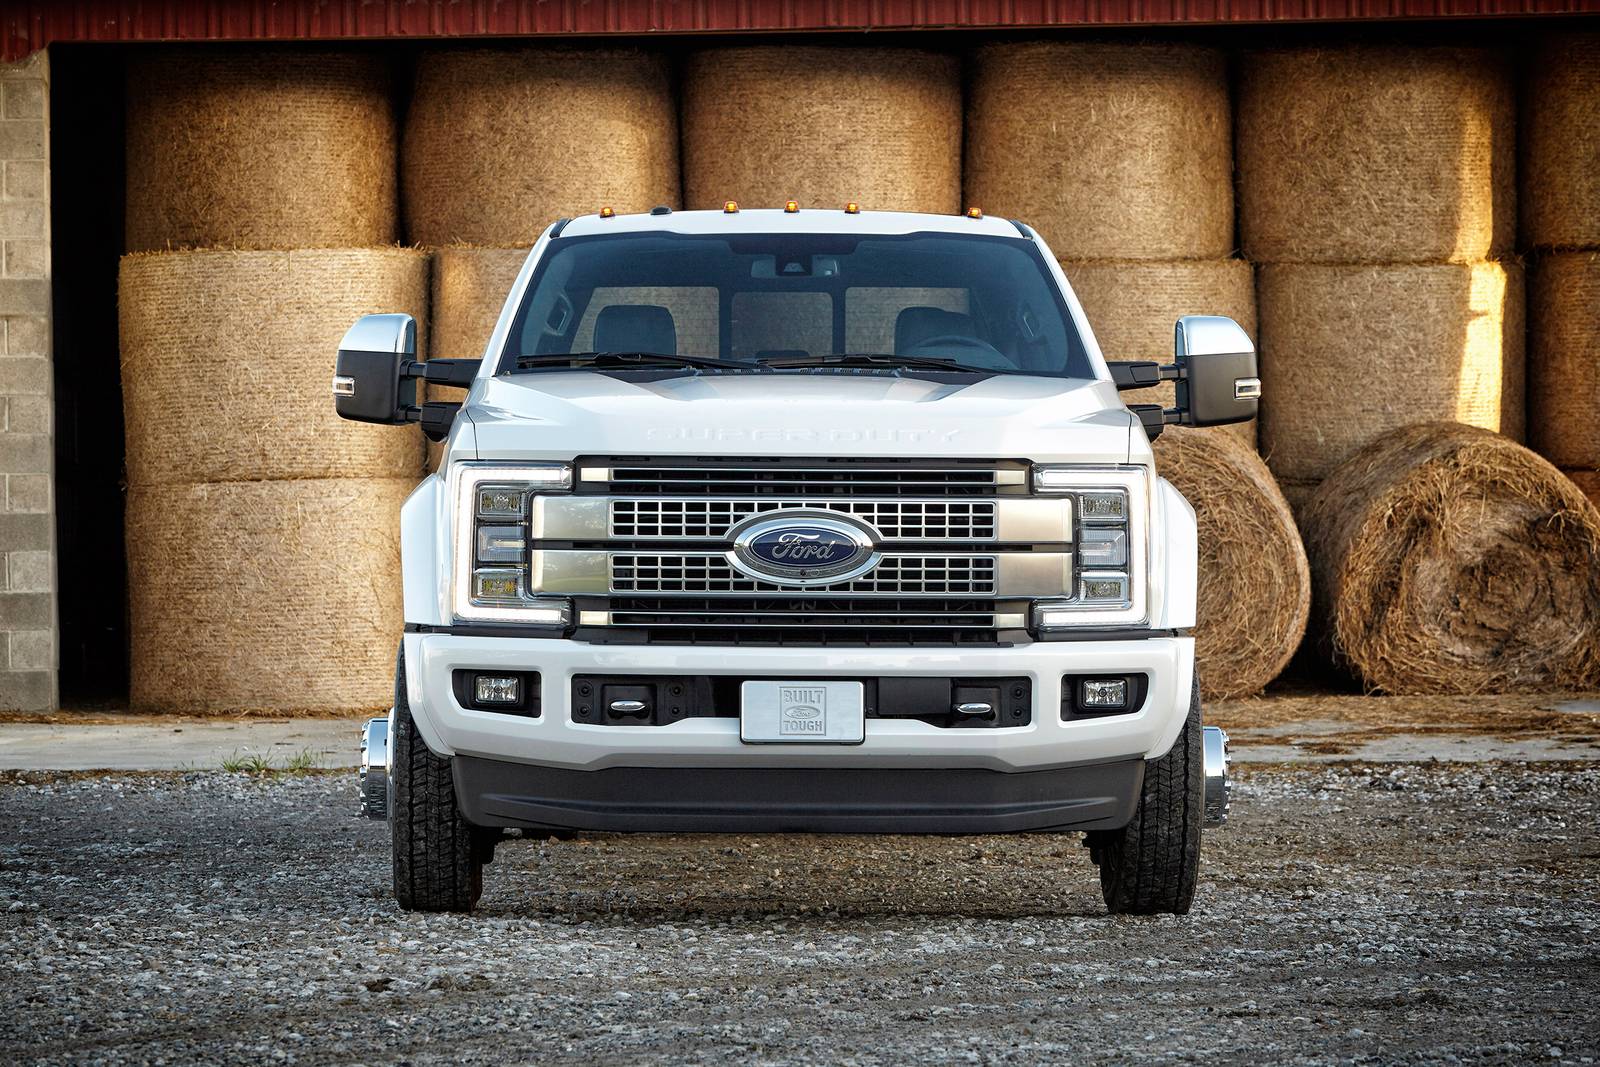 Used 2019 Ford F-450 Super Duty Regular Cab Review | Edmunds